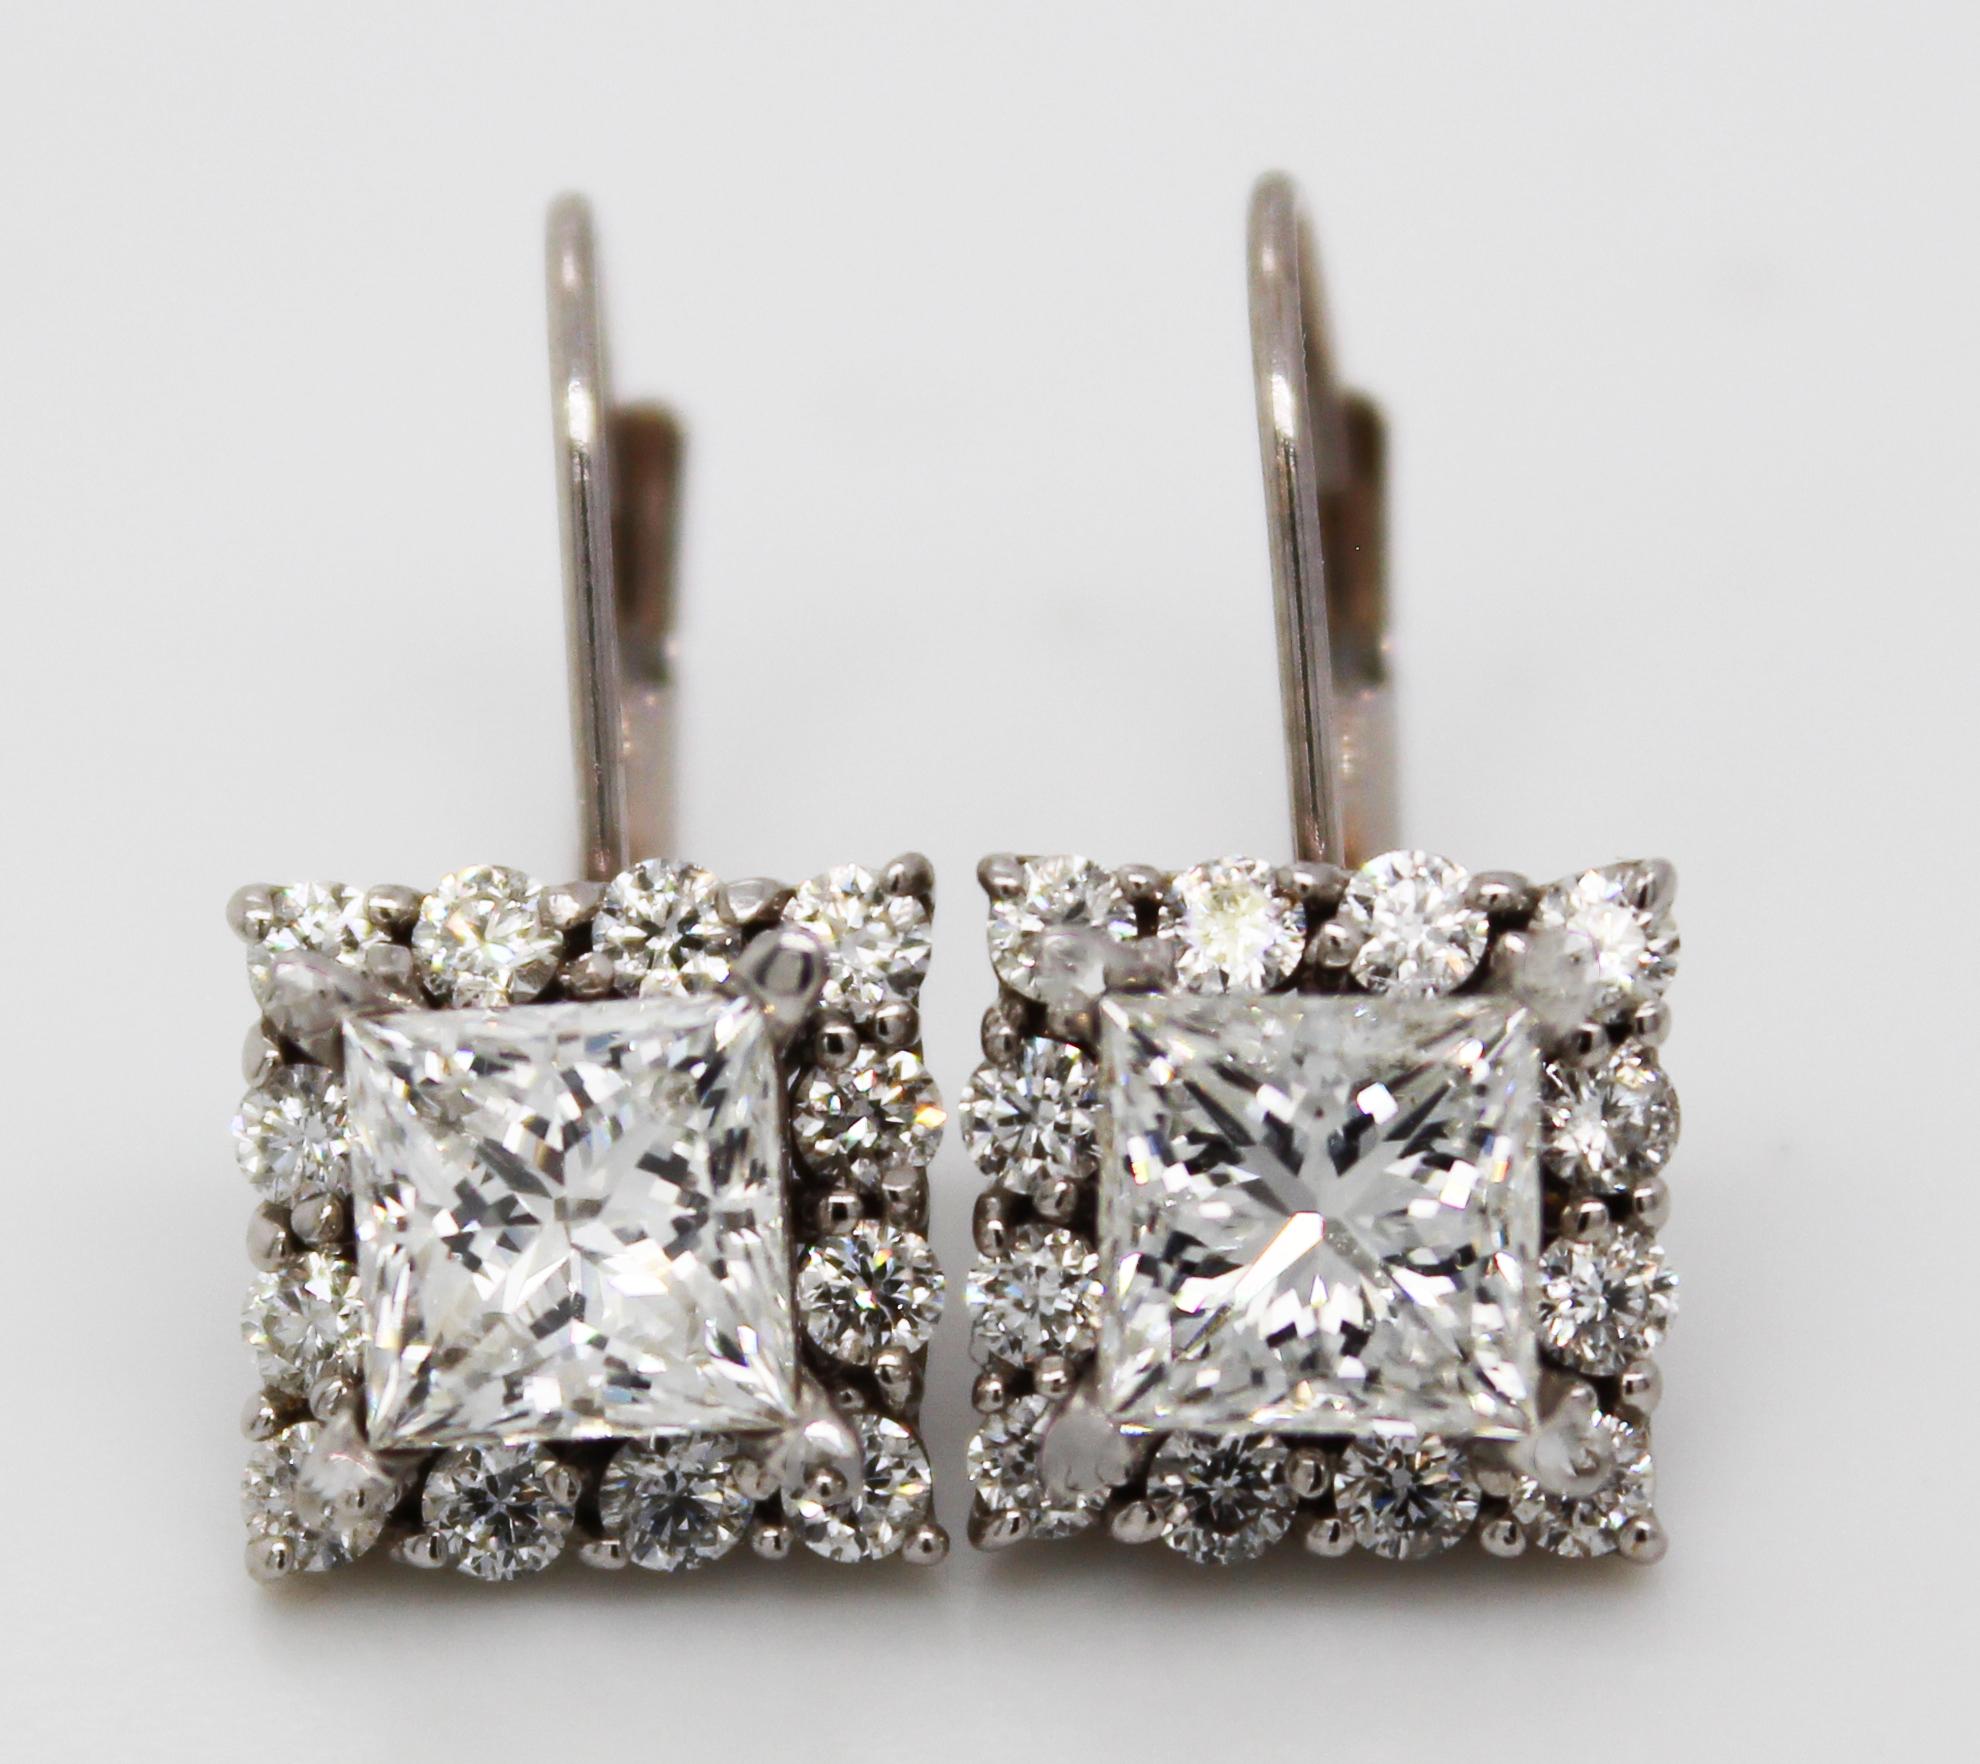 These incredible earrings are in 14k white gold and feature 3.00 carats of stunning, brilliant white diamonds! The gorgeous layout of these earrings feature a large princess cut diamond center surrounded by a frame of round diamonds. The layered